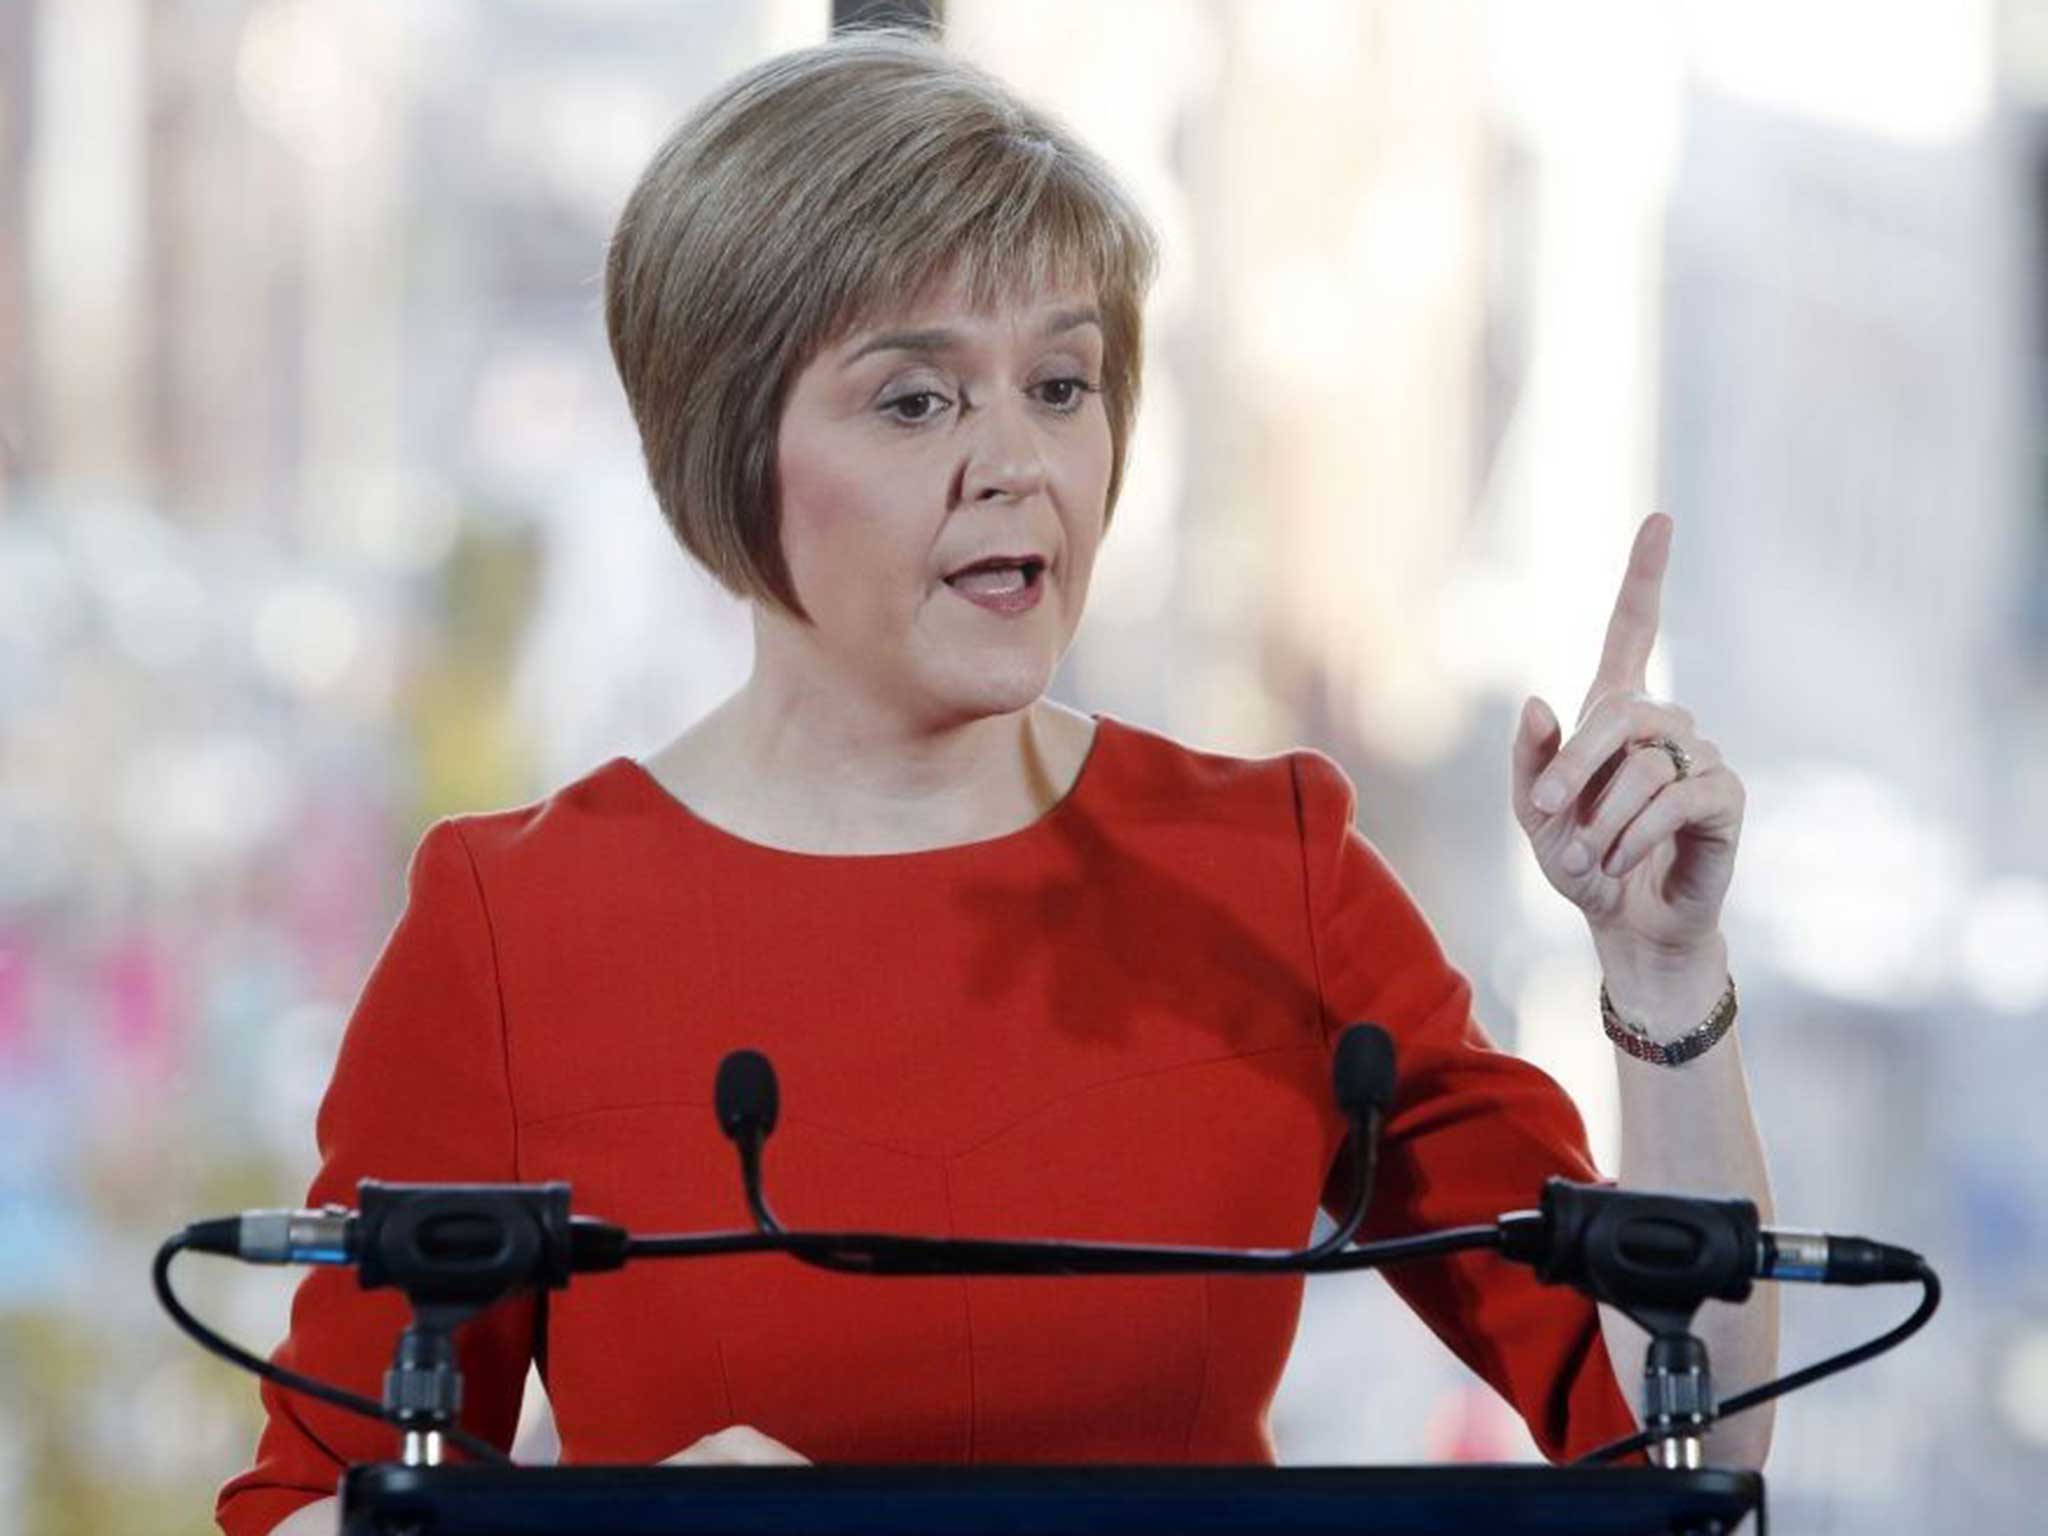 Nicola Sturgeon is a less flamboyant figure, but poses an equally serious threat to the status quo